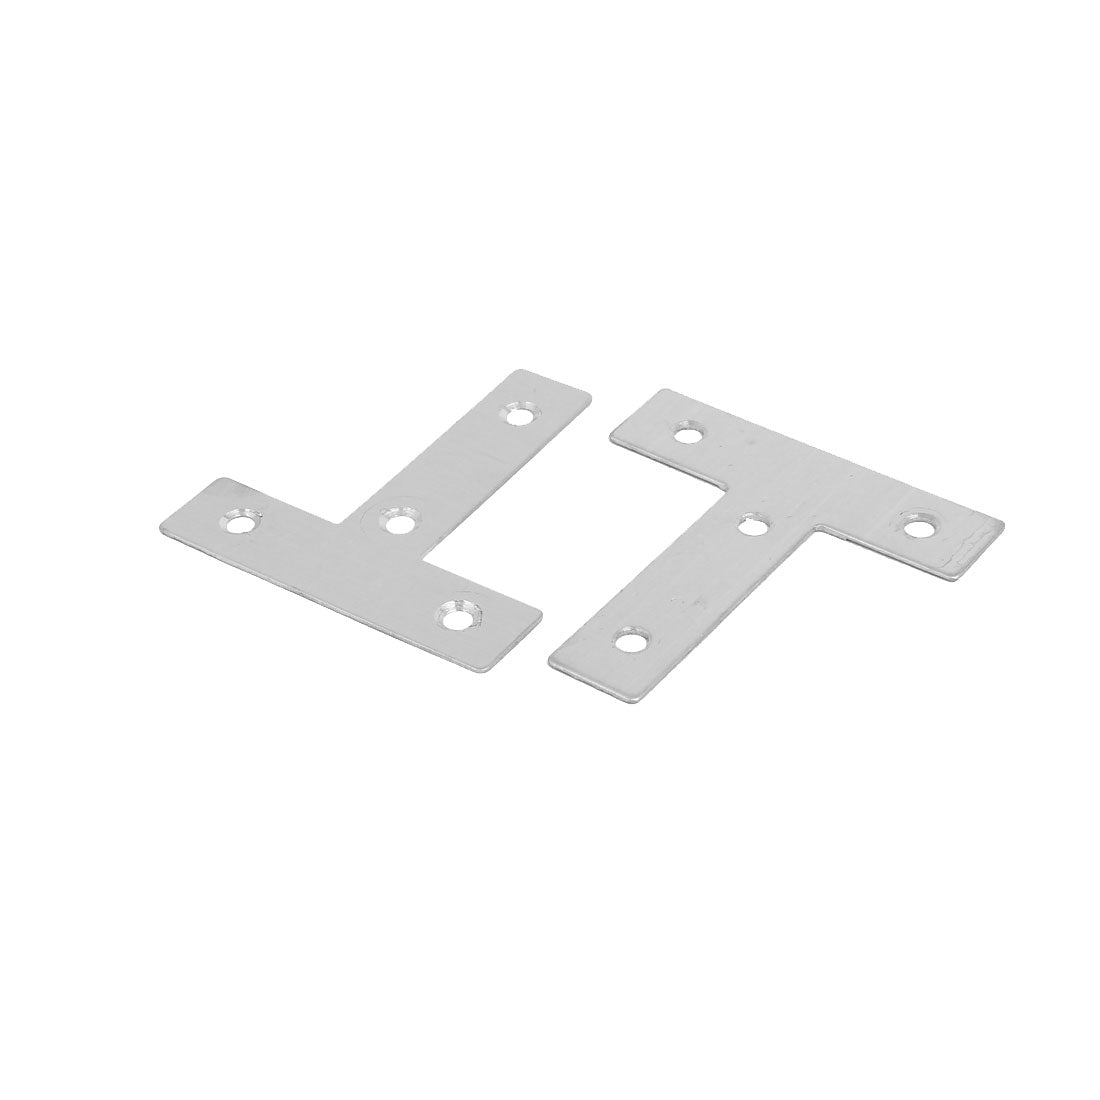 uxcell Uxcell 60mmx60mmx1mm Stainless Steel Flat T Shaped Corner Brace Repair Plates 4pcs